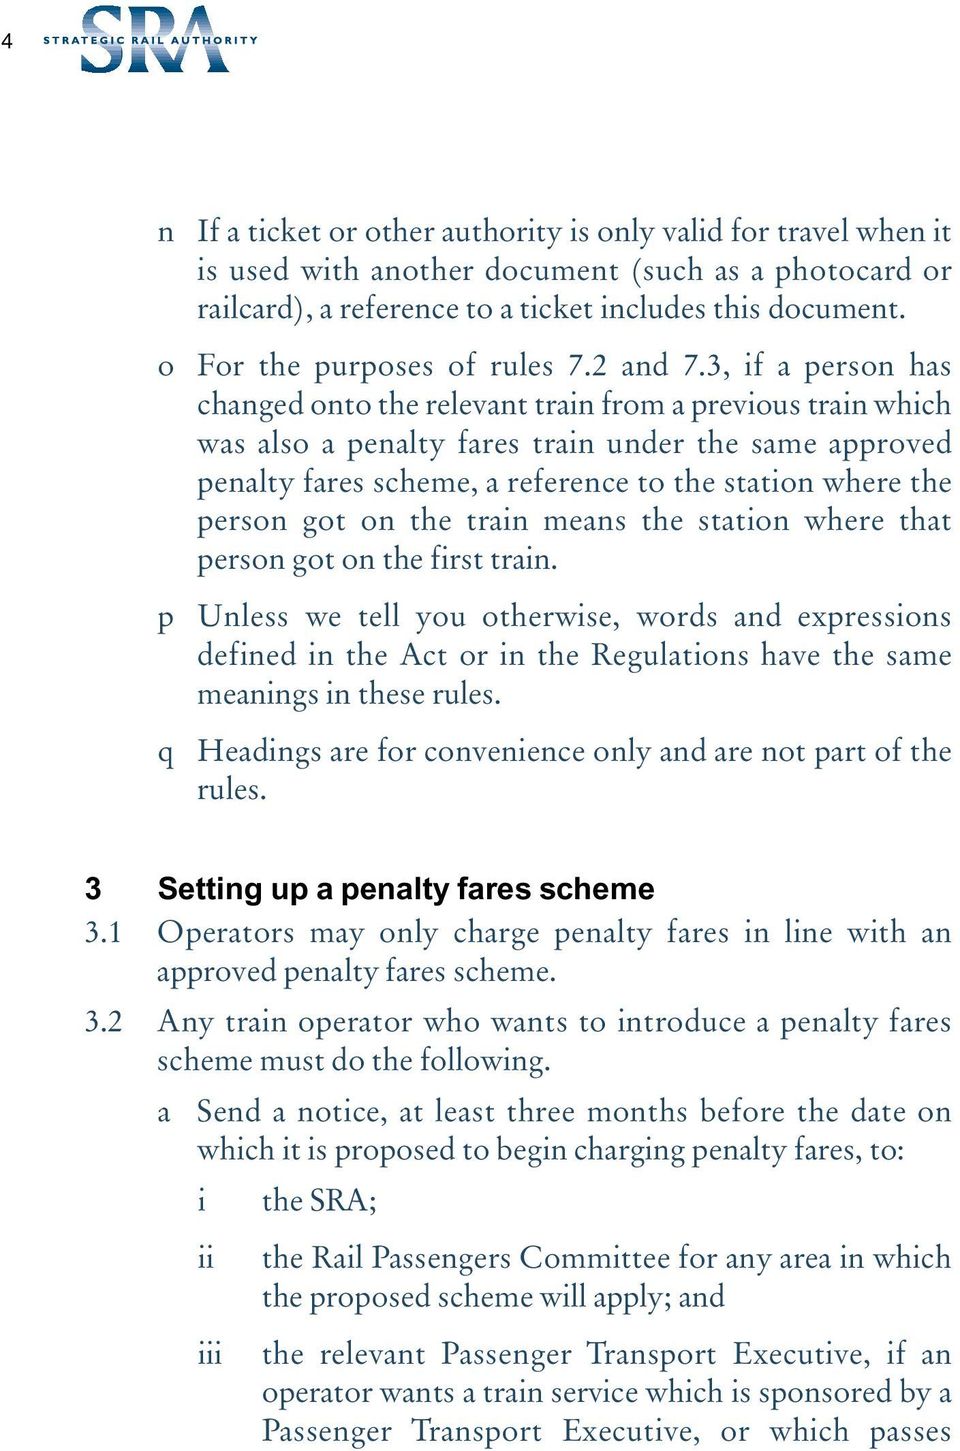 3, if a person has changed onto the relevant train from a previous train which was also a penalty fares train under the same approved penalty fares scheme, a reference to the station where the person